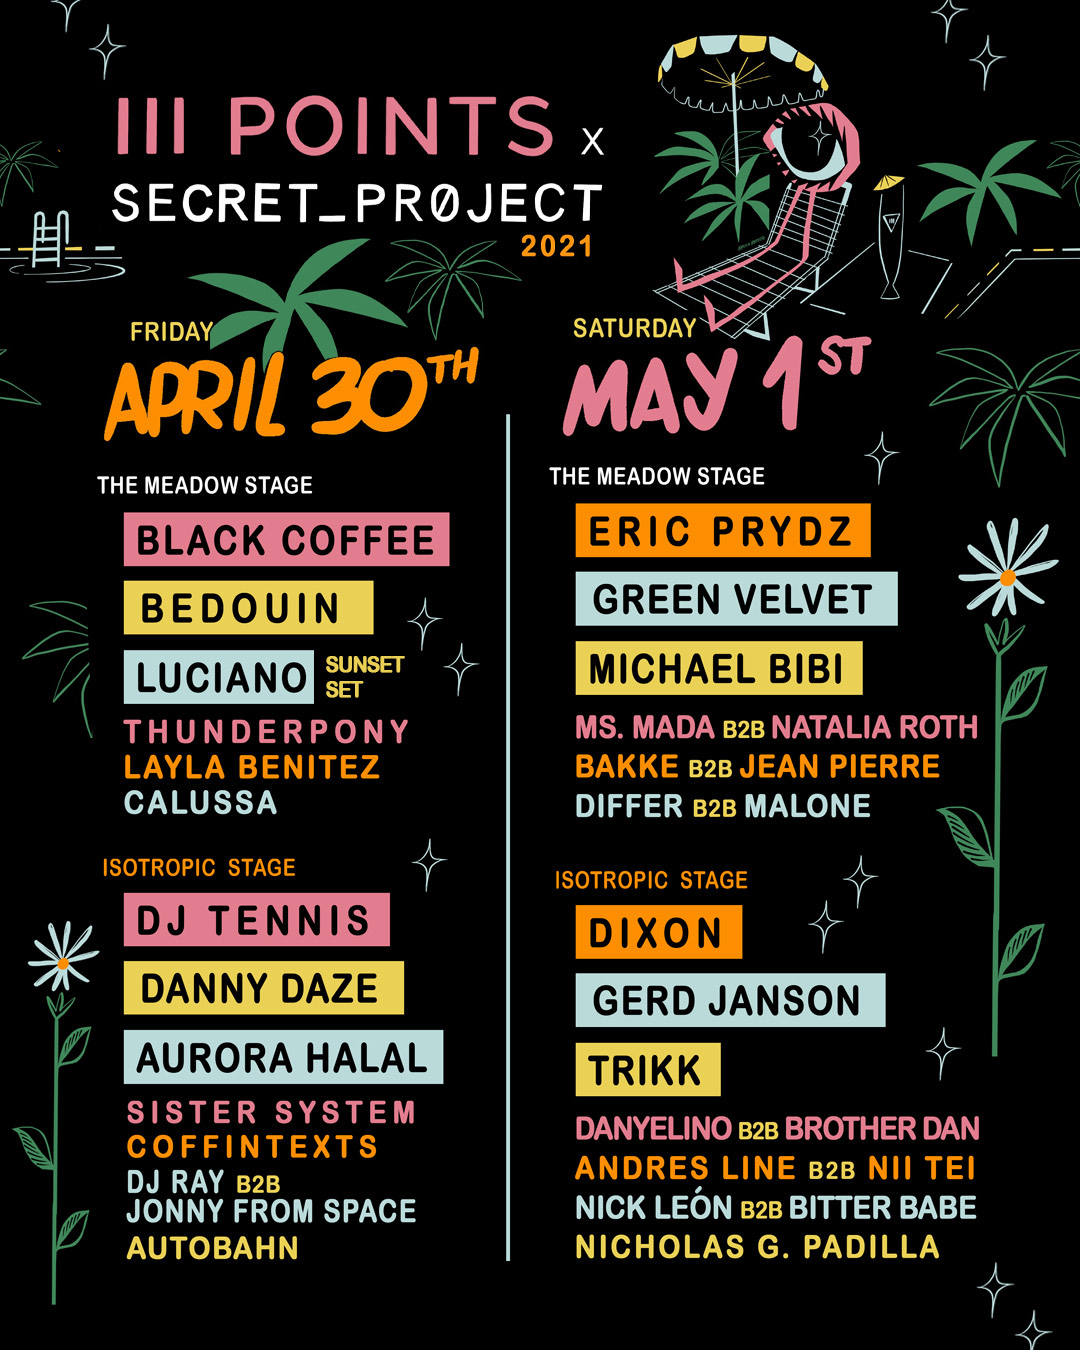 Festival III Points x Secret Project Miami, Fla. tickets and lineup